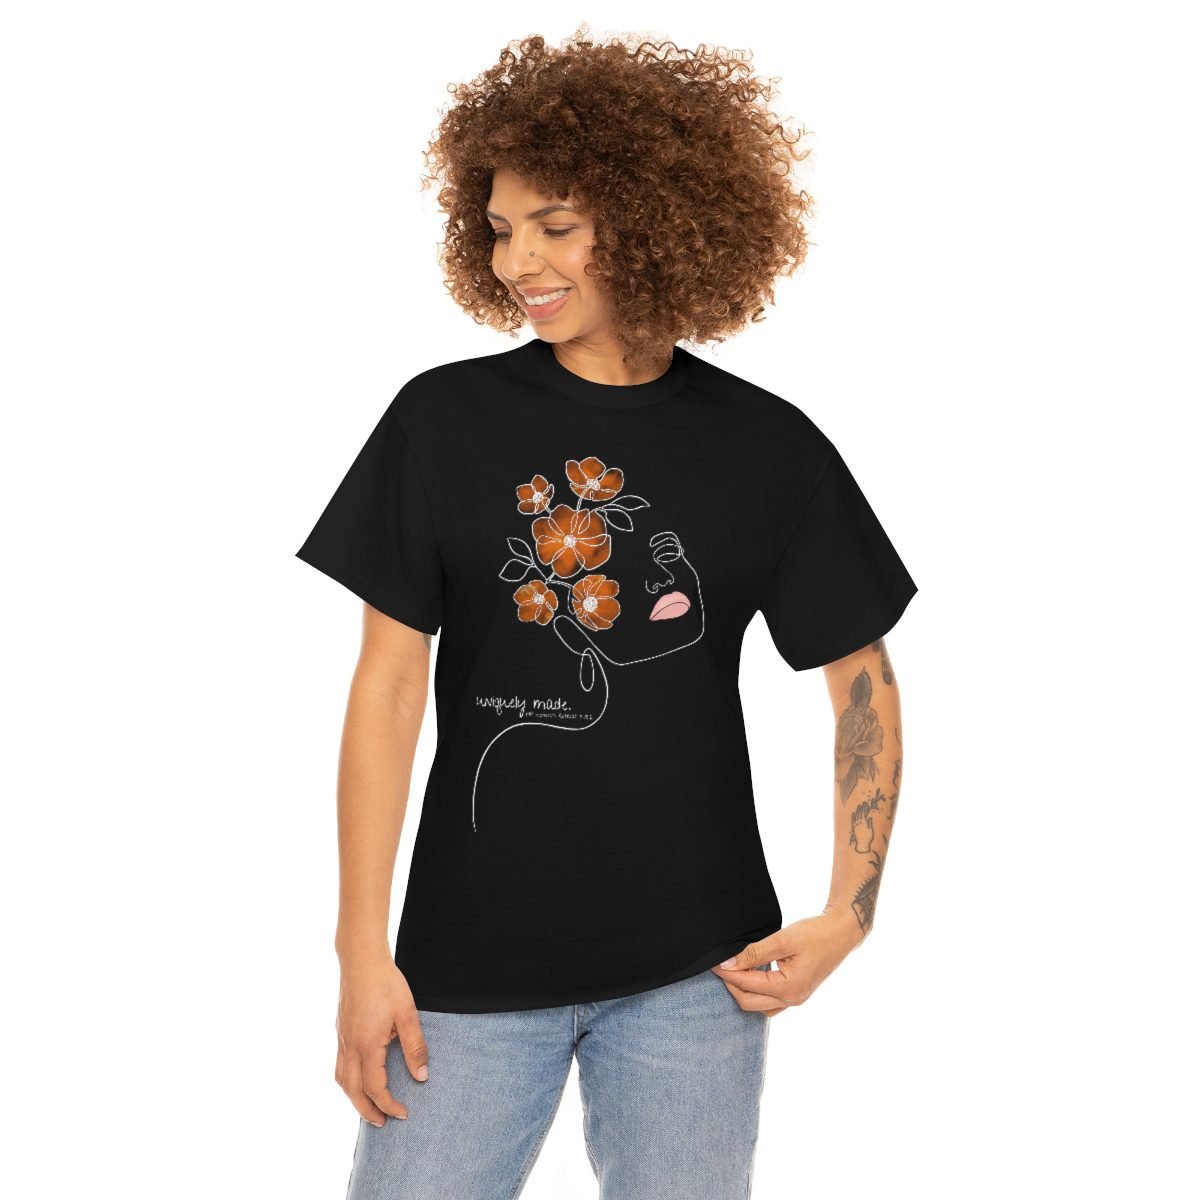 His Place Women’s Ministry – Uniquely Made Short Sleeve Tshirt (5000)